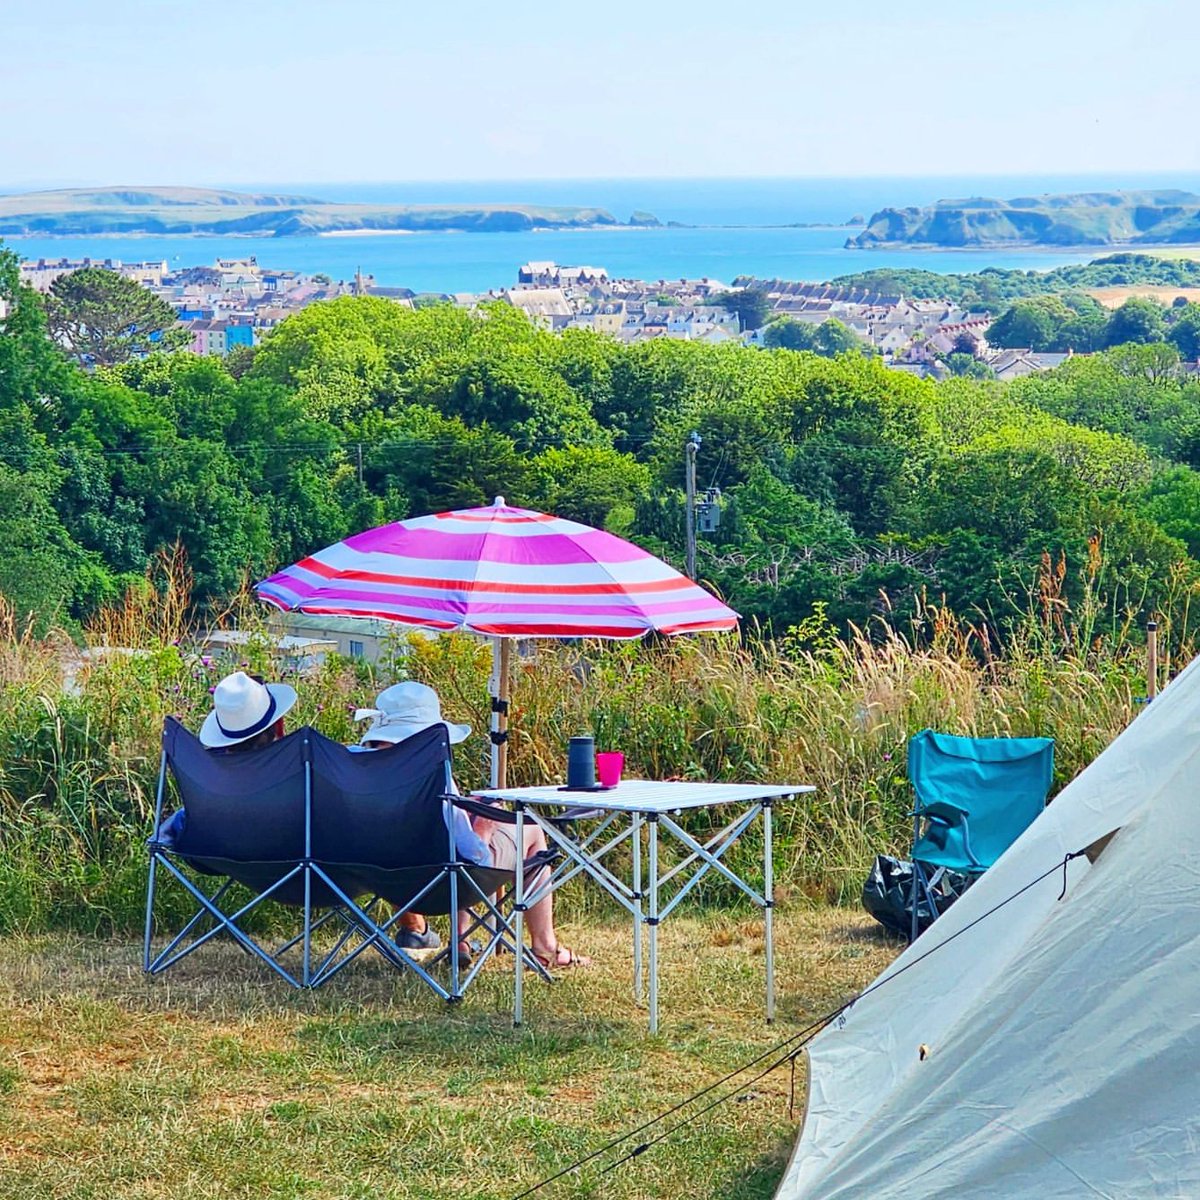 Camping by the seaside and taking in the stunning views. What could be better? 

Photo by @meadowfarmcampsitetenby 

#vacationmode #tenbyvibes #naturelover #tenby #campvibes #camp #campinglife #campingtrip #campingvibes #campingweekend #campingholiday #campinglove #wales #tent